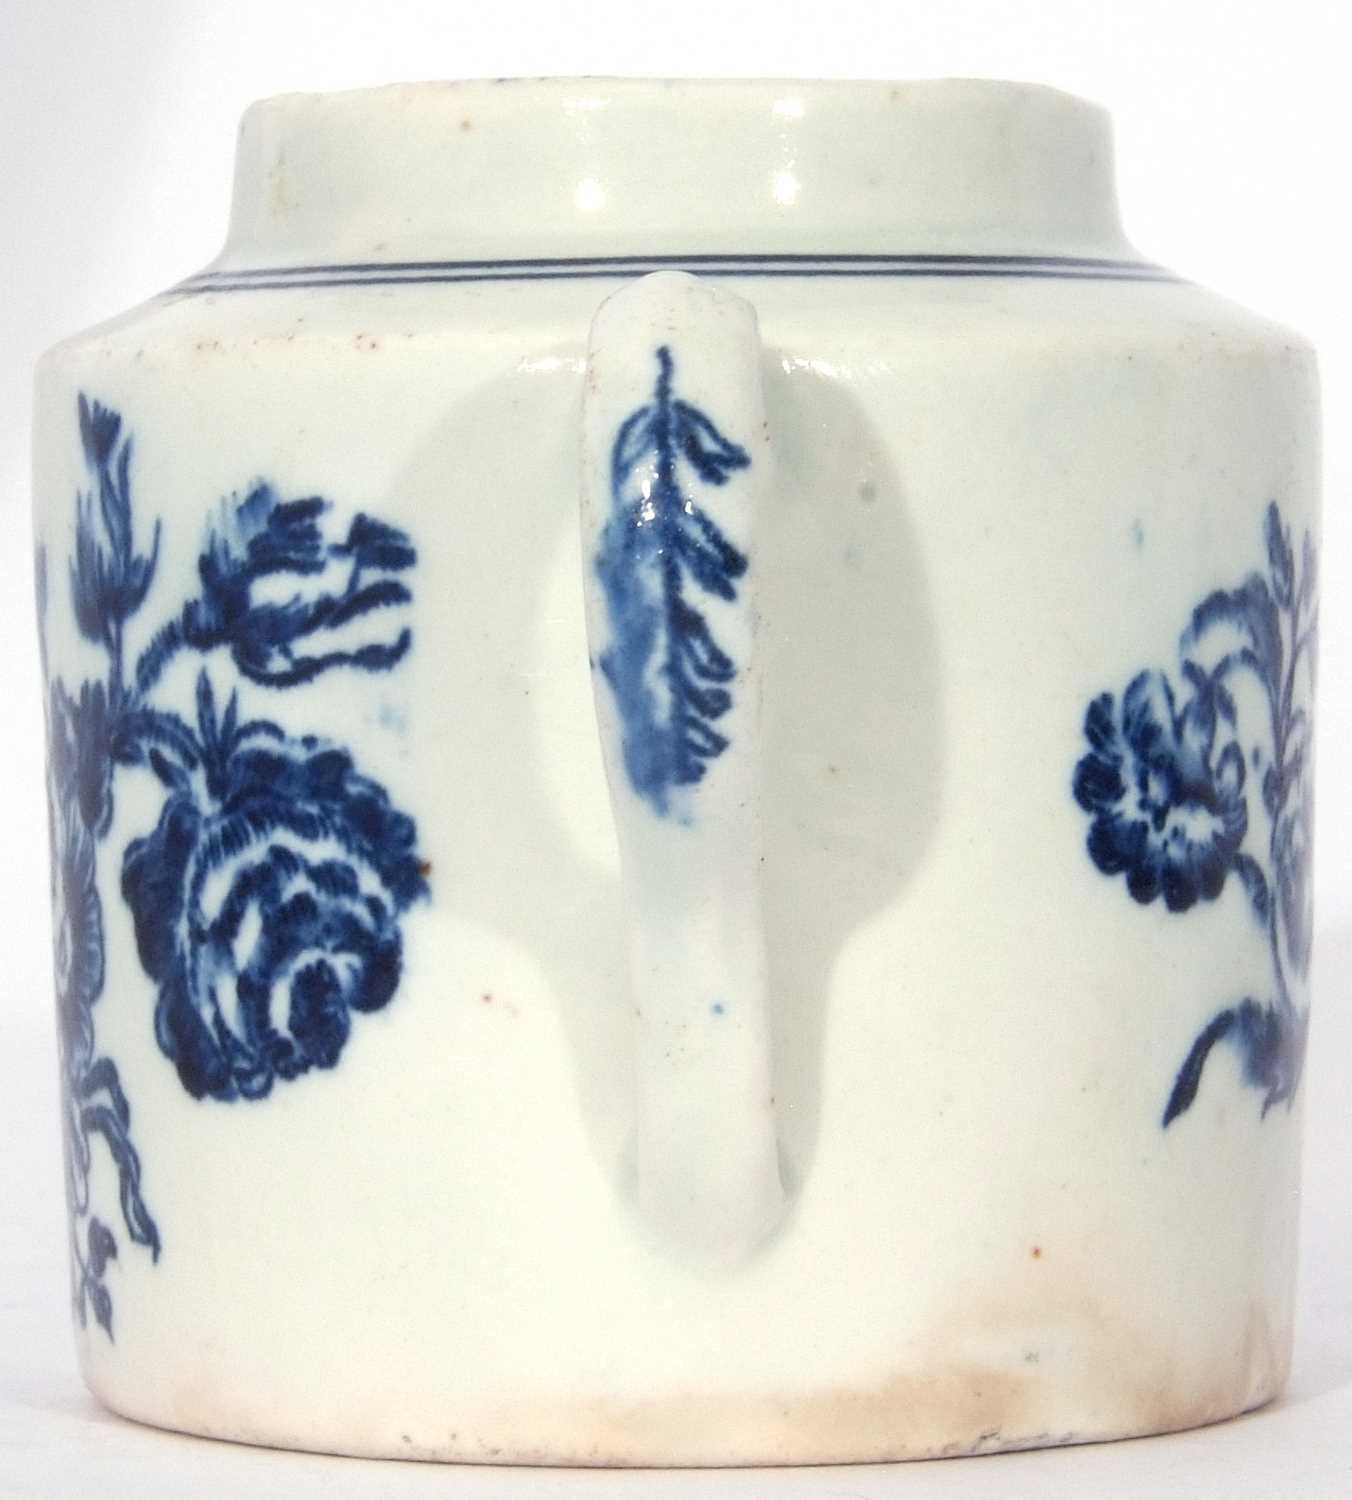 Rare Lowestoft Porcelain Mustard Pot c.1775 with ear shaped handle decorated with a Worcester - Image 3 of 8